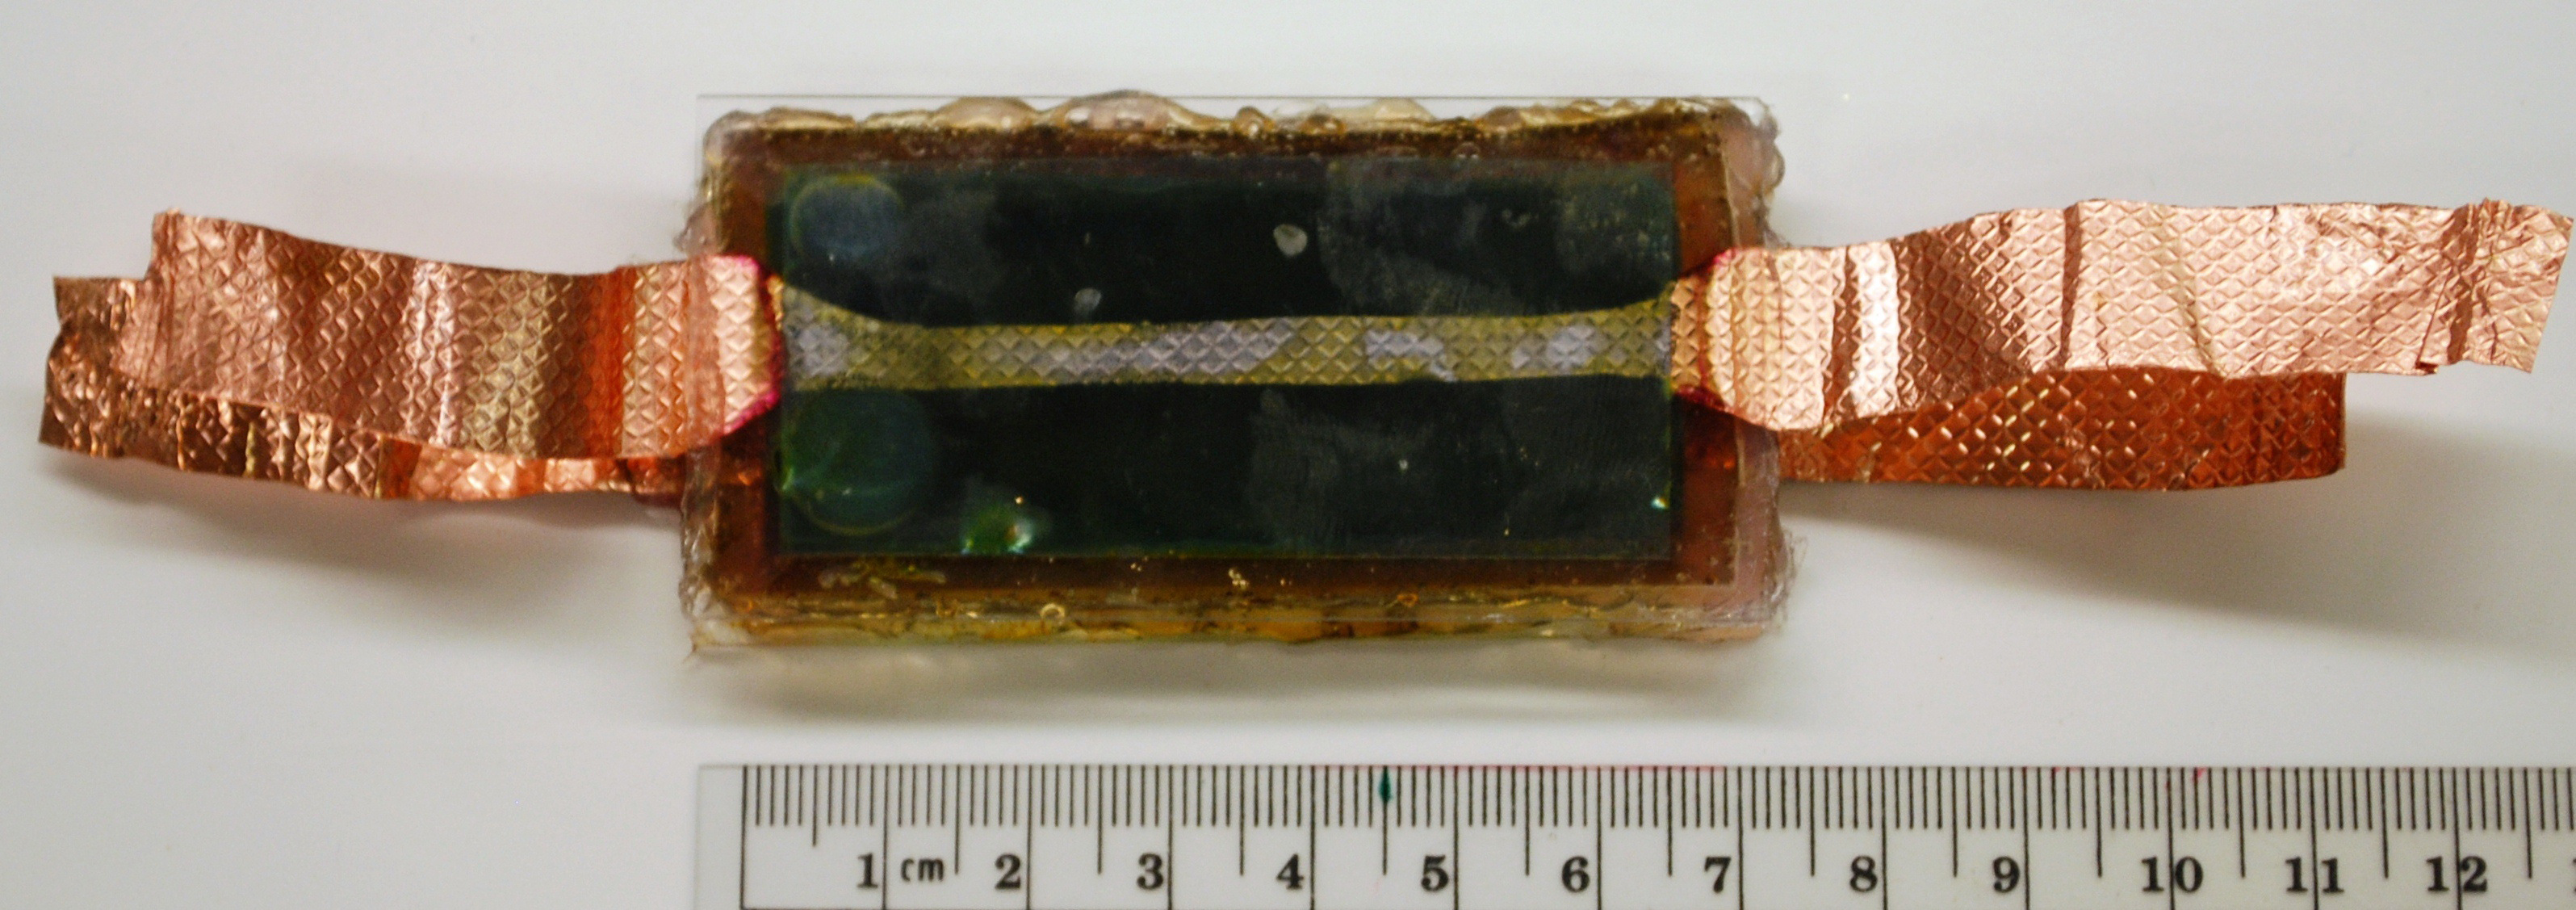 Photo of a different type of solar panel showing a biohybrid solar cell